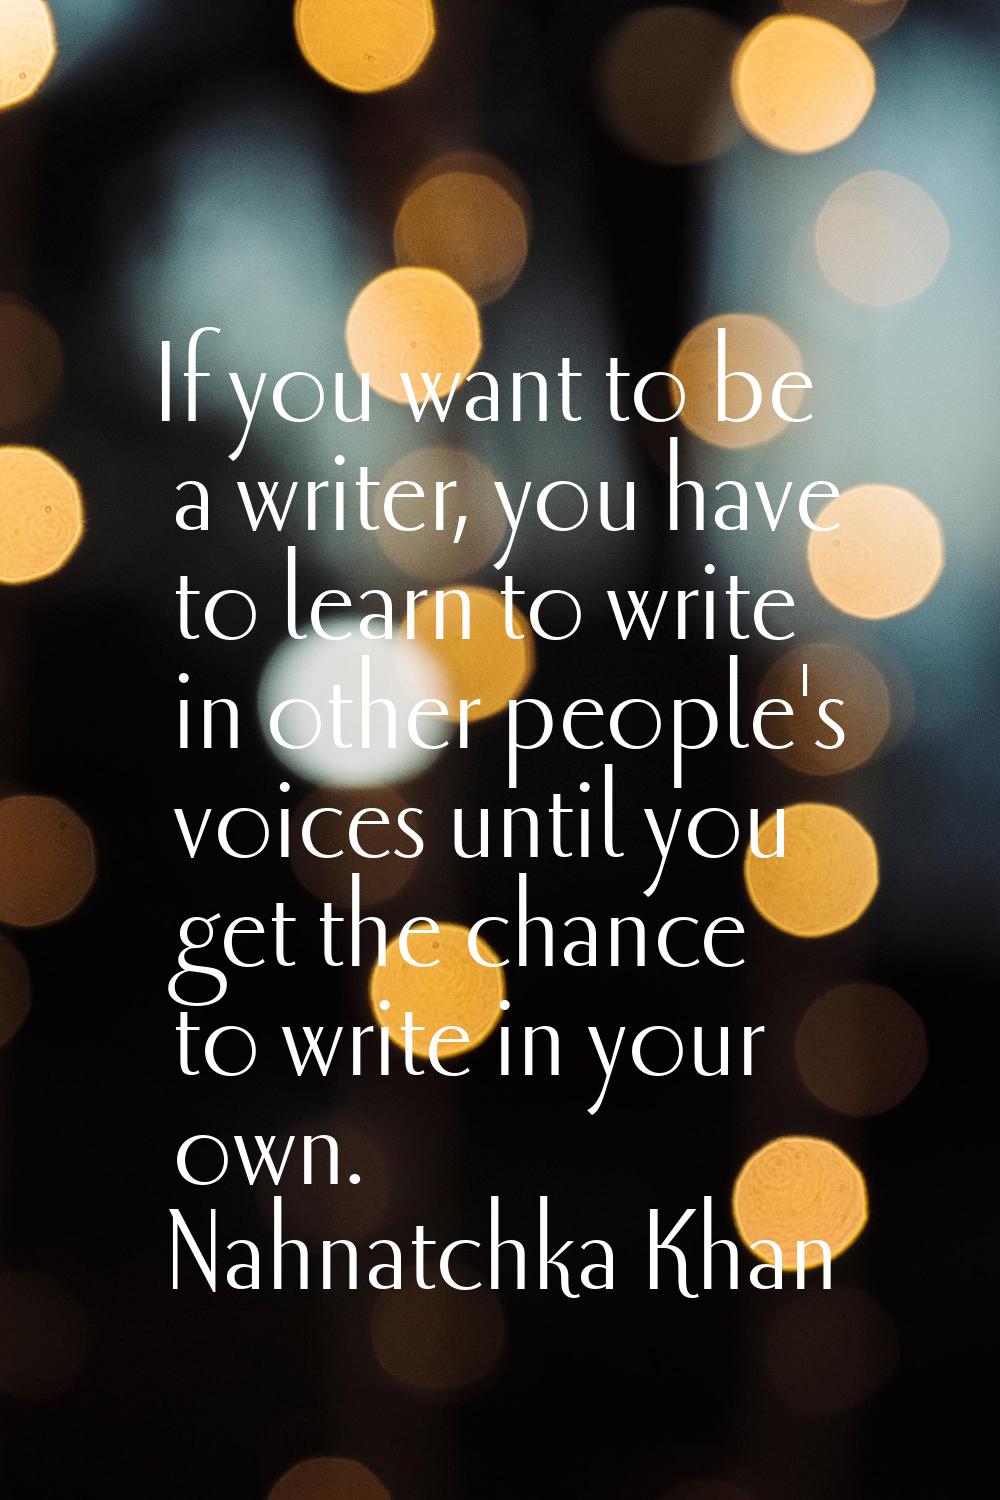 If you want to be a writer, you have to learn to write in other people's voices until you get the c